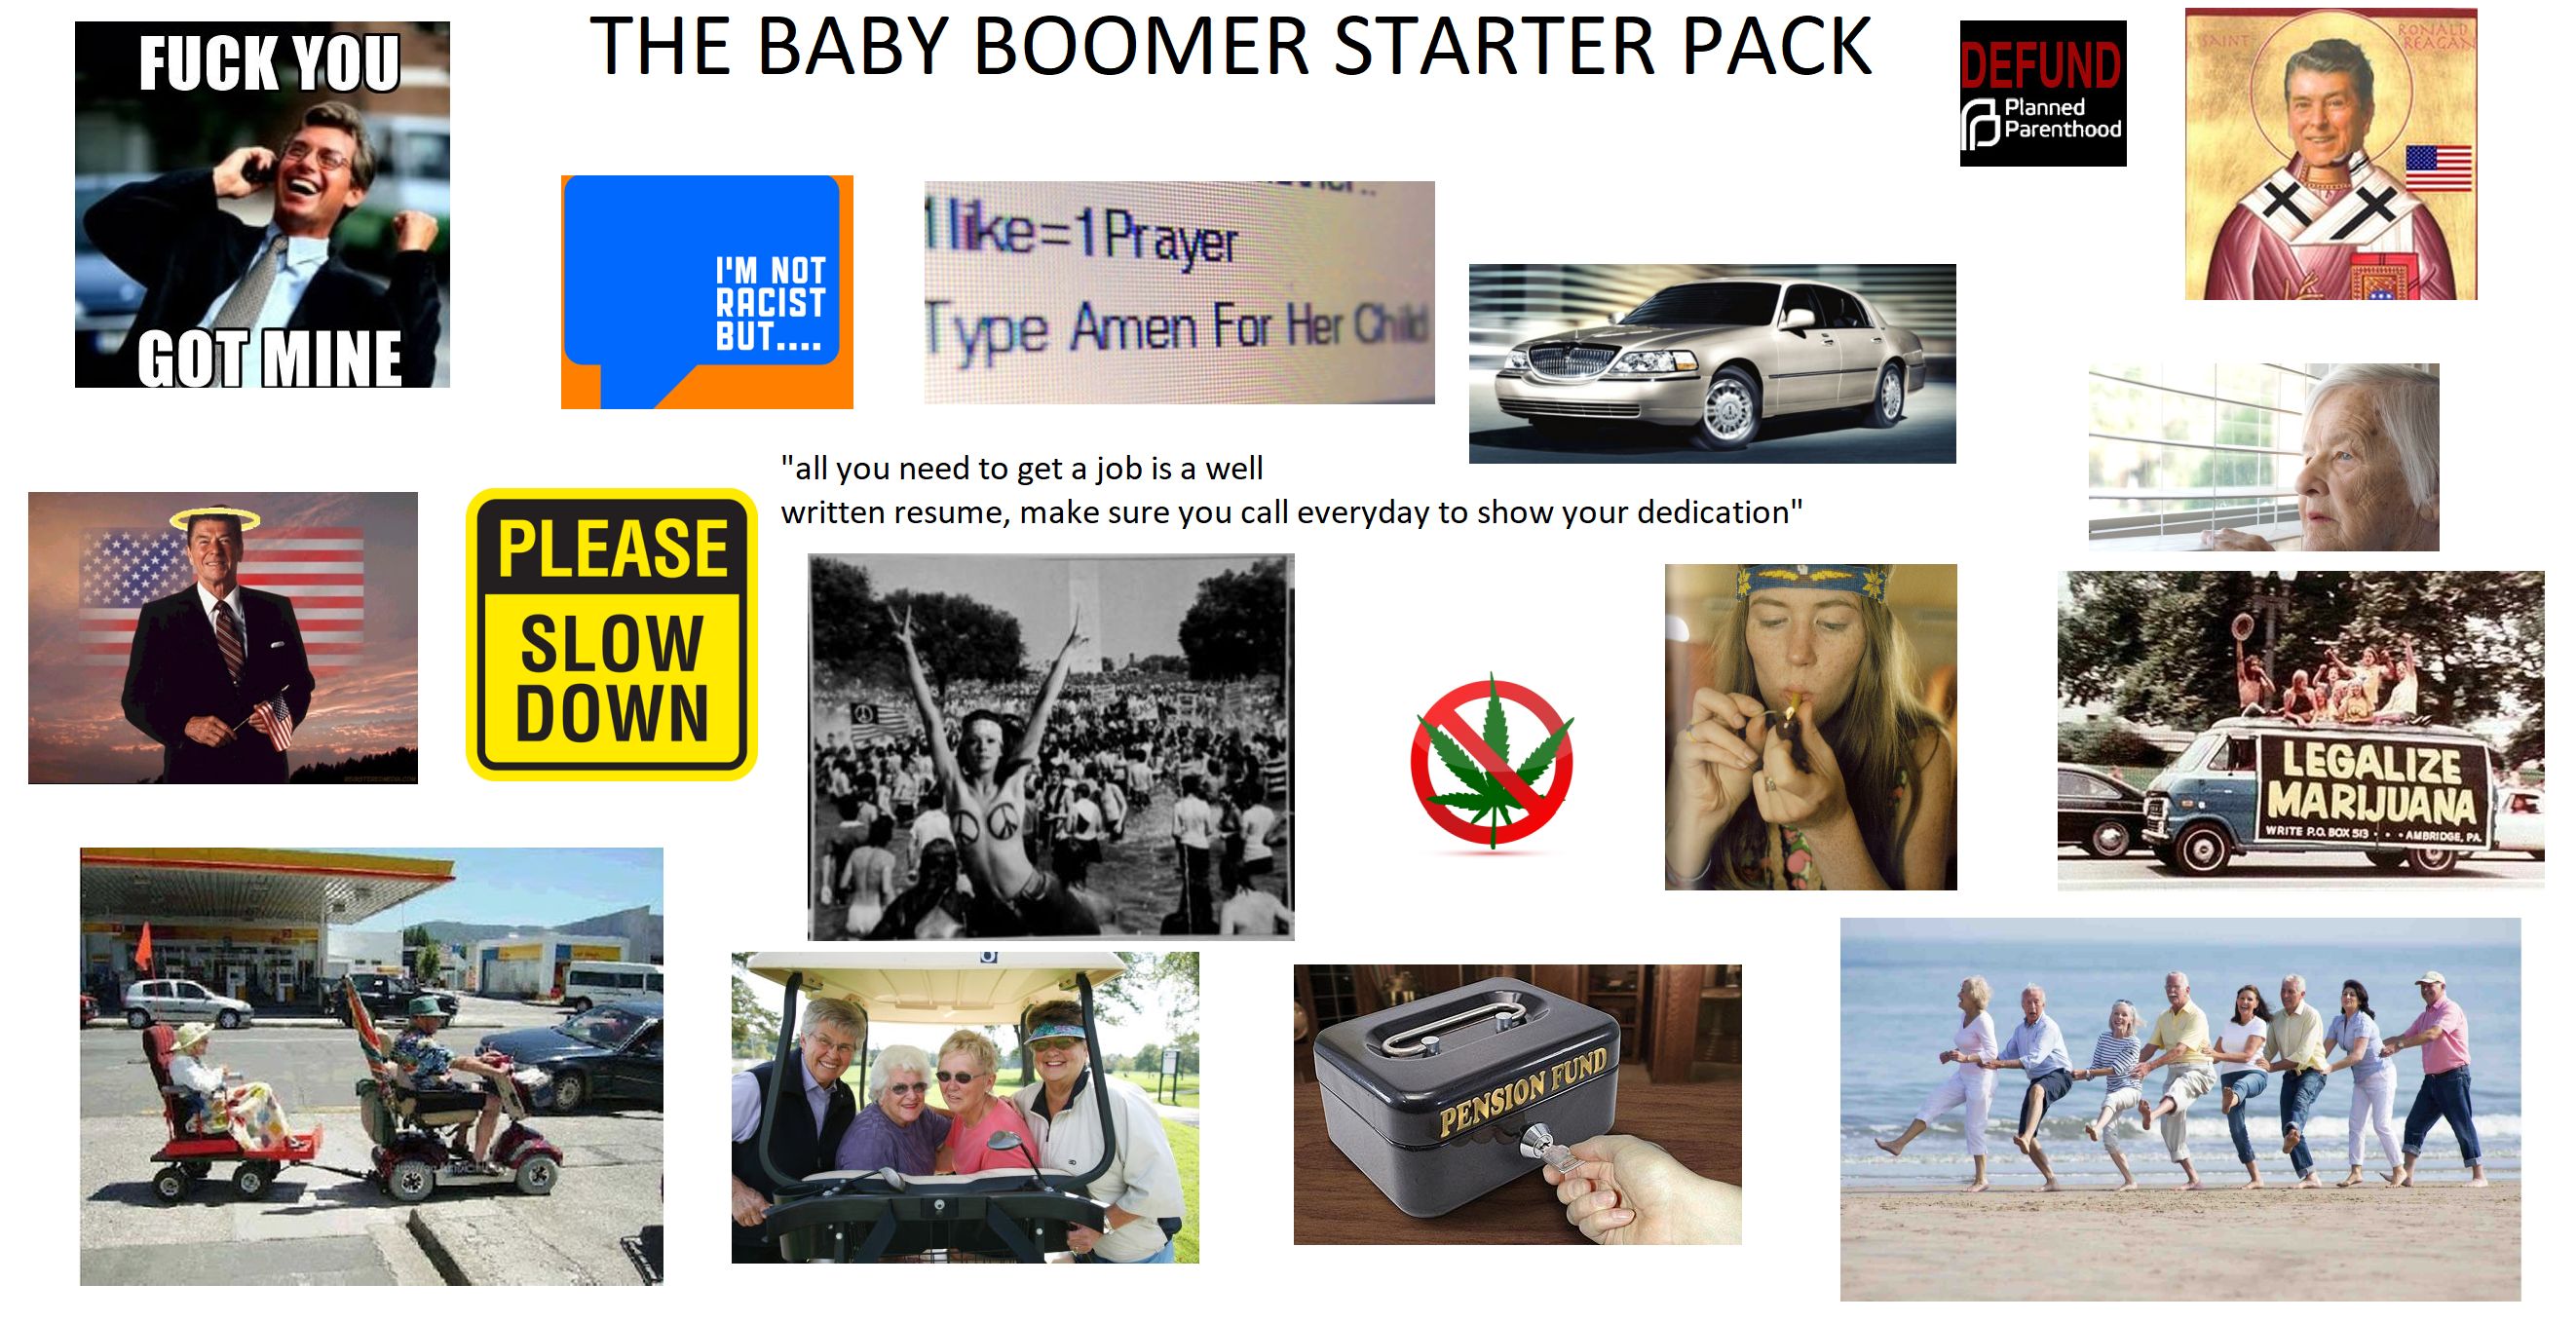 memes - baby boomer starter pack - Mer Starter Pack Fuck You The Baby Boomer Starter Pack 2. I 1 Prayer Racy "Got Mine But... Type Amen For Her "all you need to get a job is a well written resume, make sure you call everyday to show your dedication" Pleas